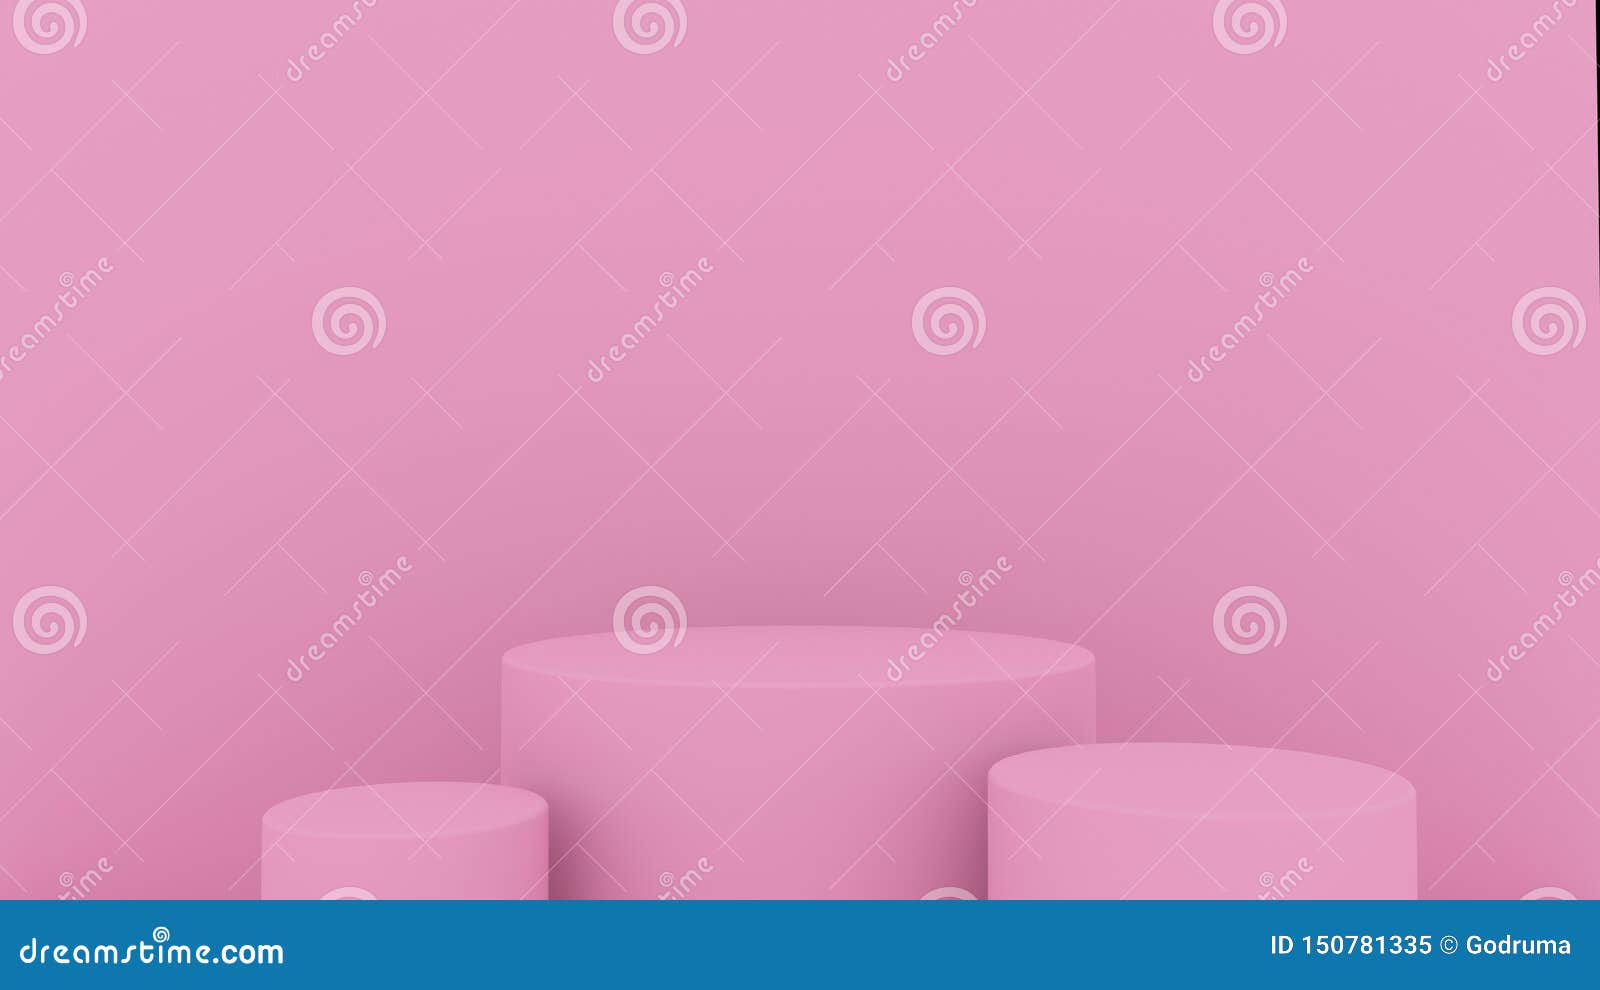 3d abstract background render. pink platform for product display. interior podium place. blank decoration template for